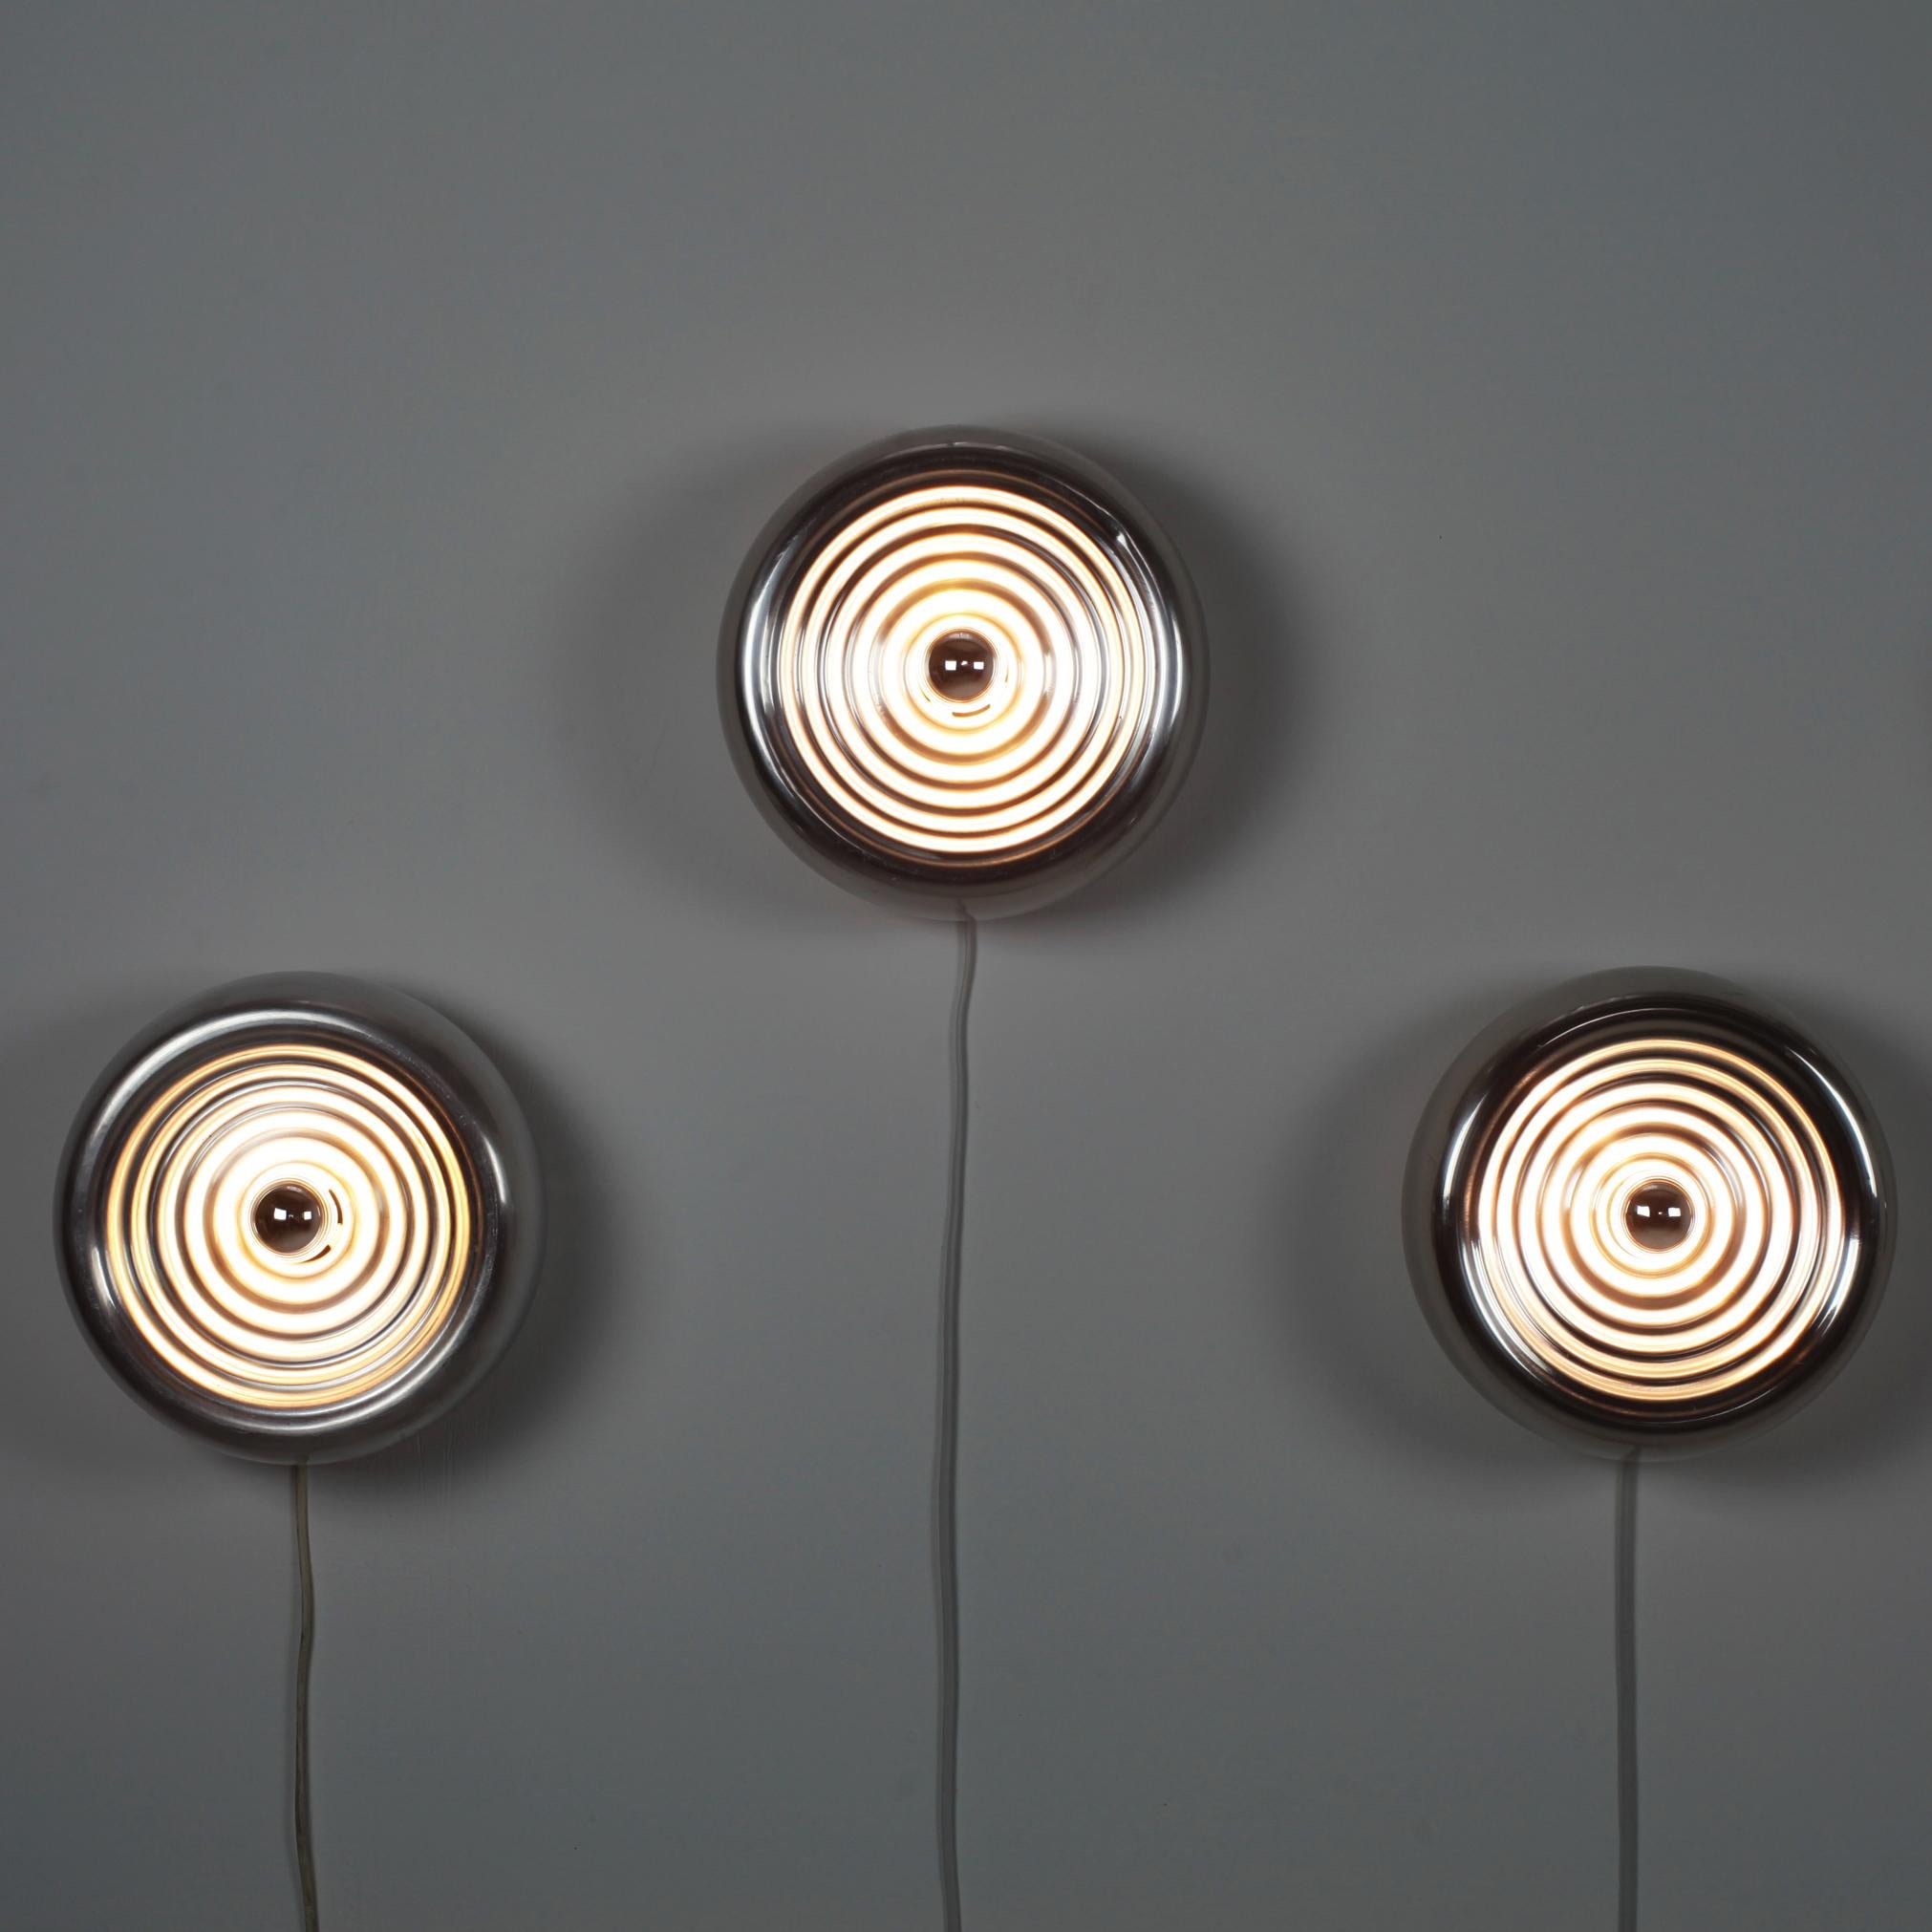 Beautiful set of 3 wall or ceiling lamps by Achille and Pier Giacomo Castiglioni manufactured by Flos in the late 1960s.
Polished corrugated spun aluminum.
No longer manufactured.
Iconic design.

Need E14 bulb.